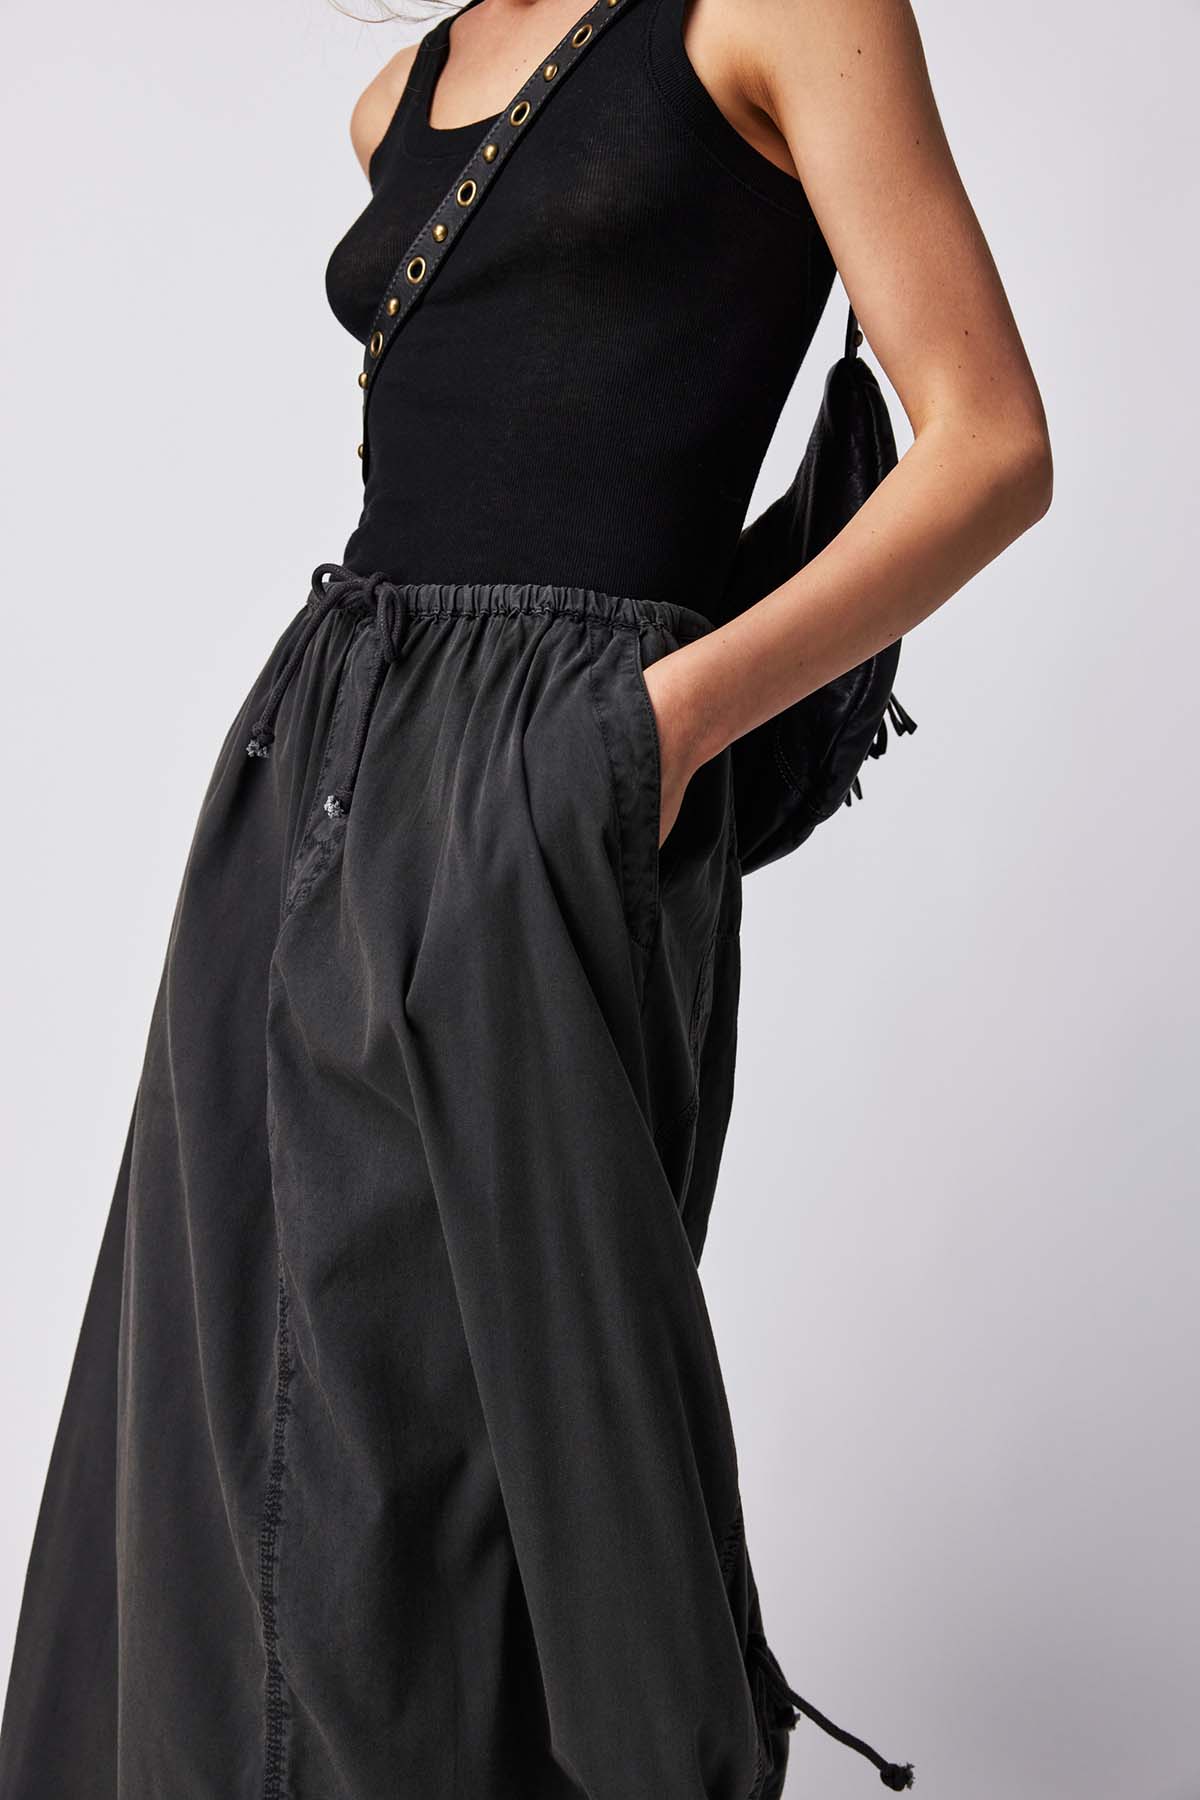 Free People - Picture Perfect Parachute - Black 2 - Detail